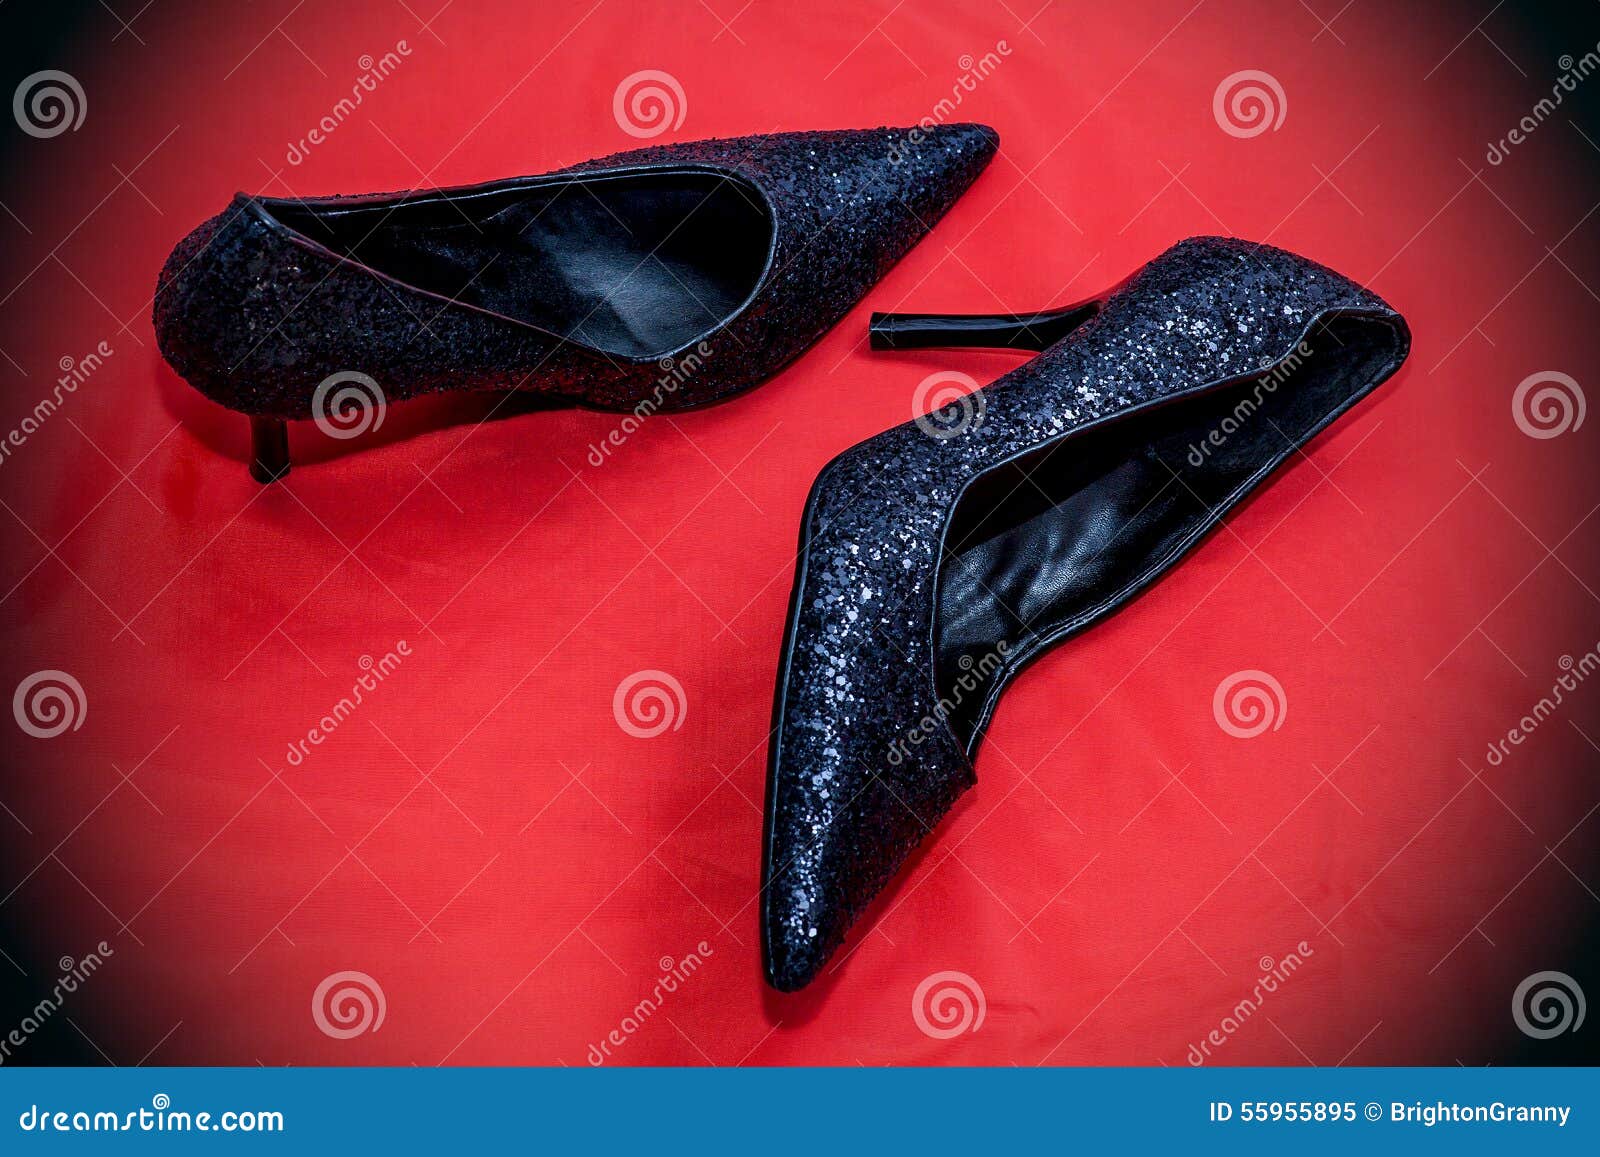 Sparkly shoes stock image. Image of shoes, glamour, footwear - 55955895